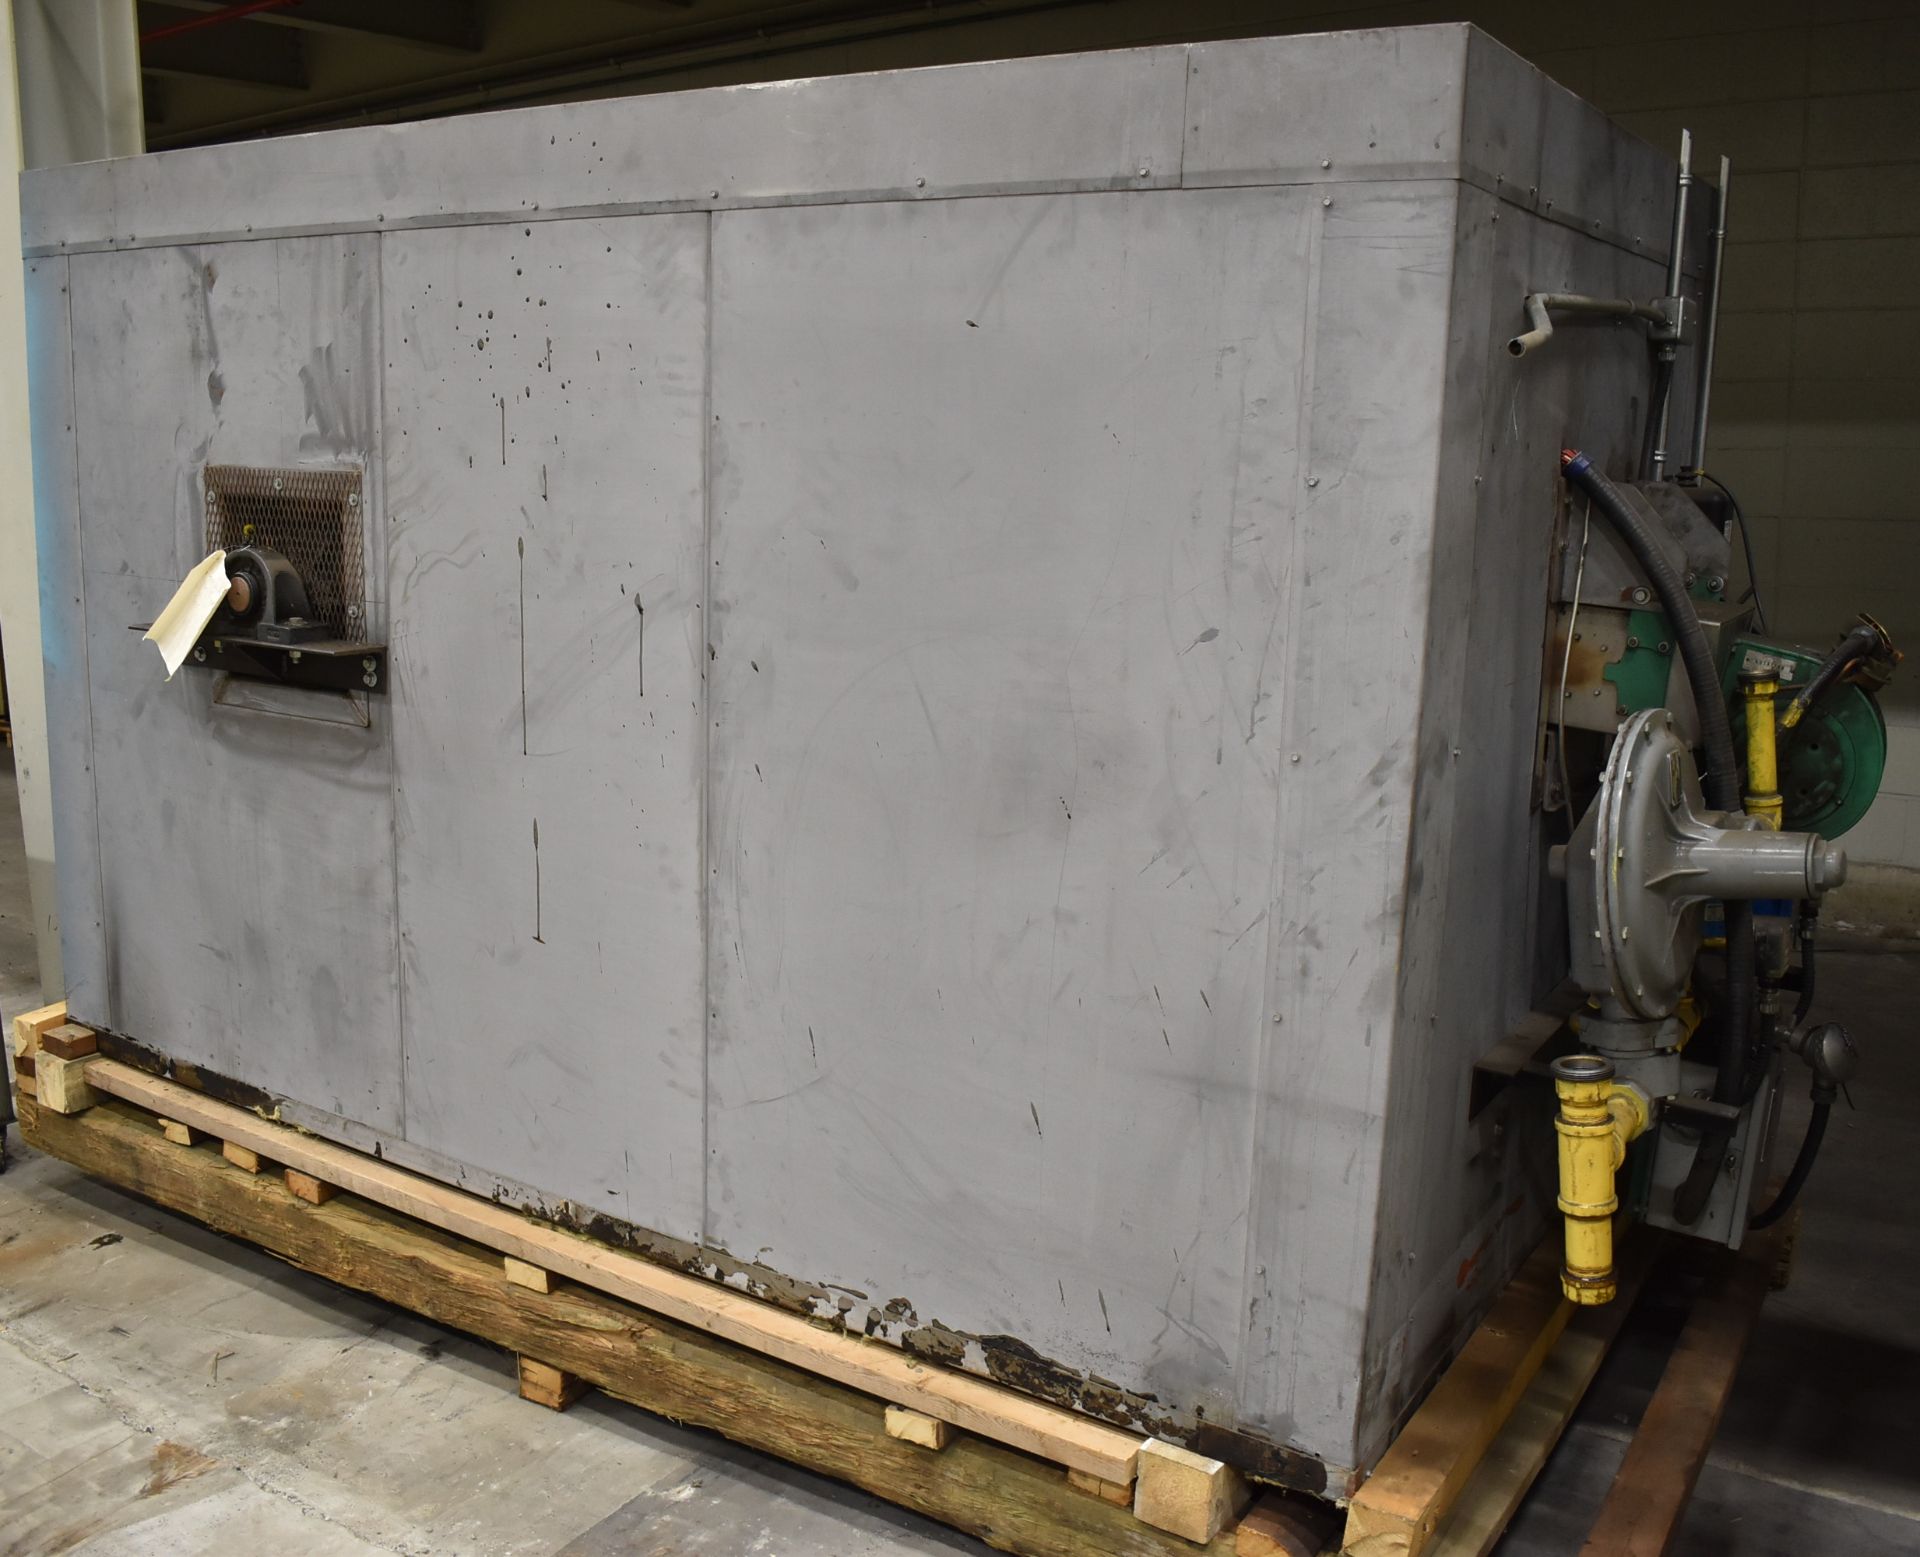 MFG. UNKNOWN HEAT TREAT OVEN WITH ECLIPSE 1,000,000 BTUH NATURAL GAS BURNER, S/N: N/A (CI) - Image 2 of 5